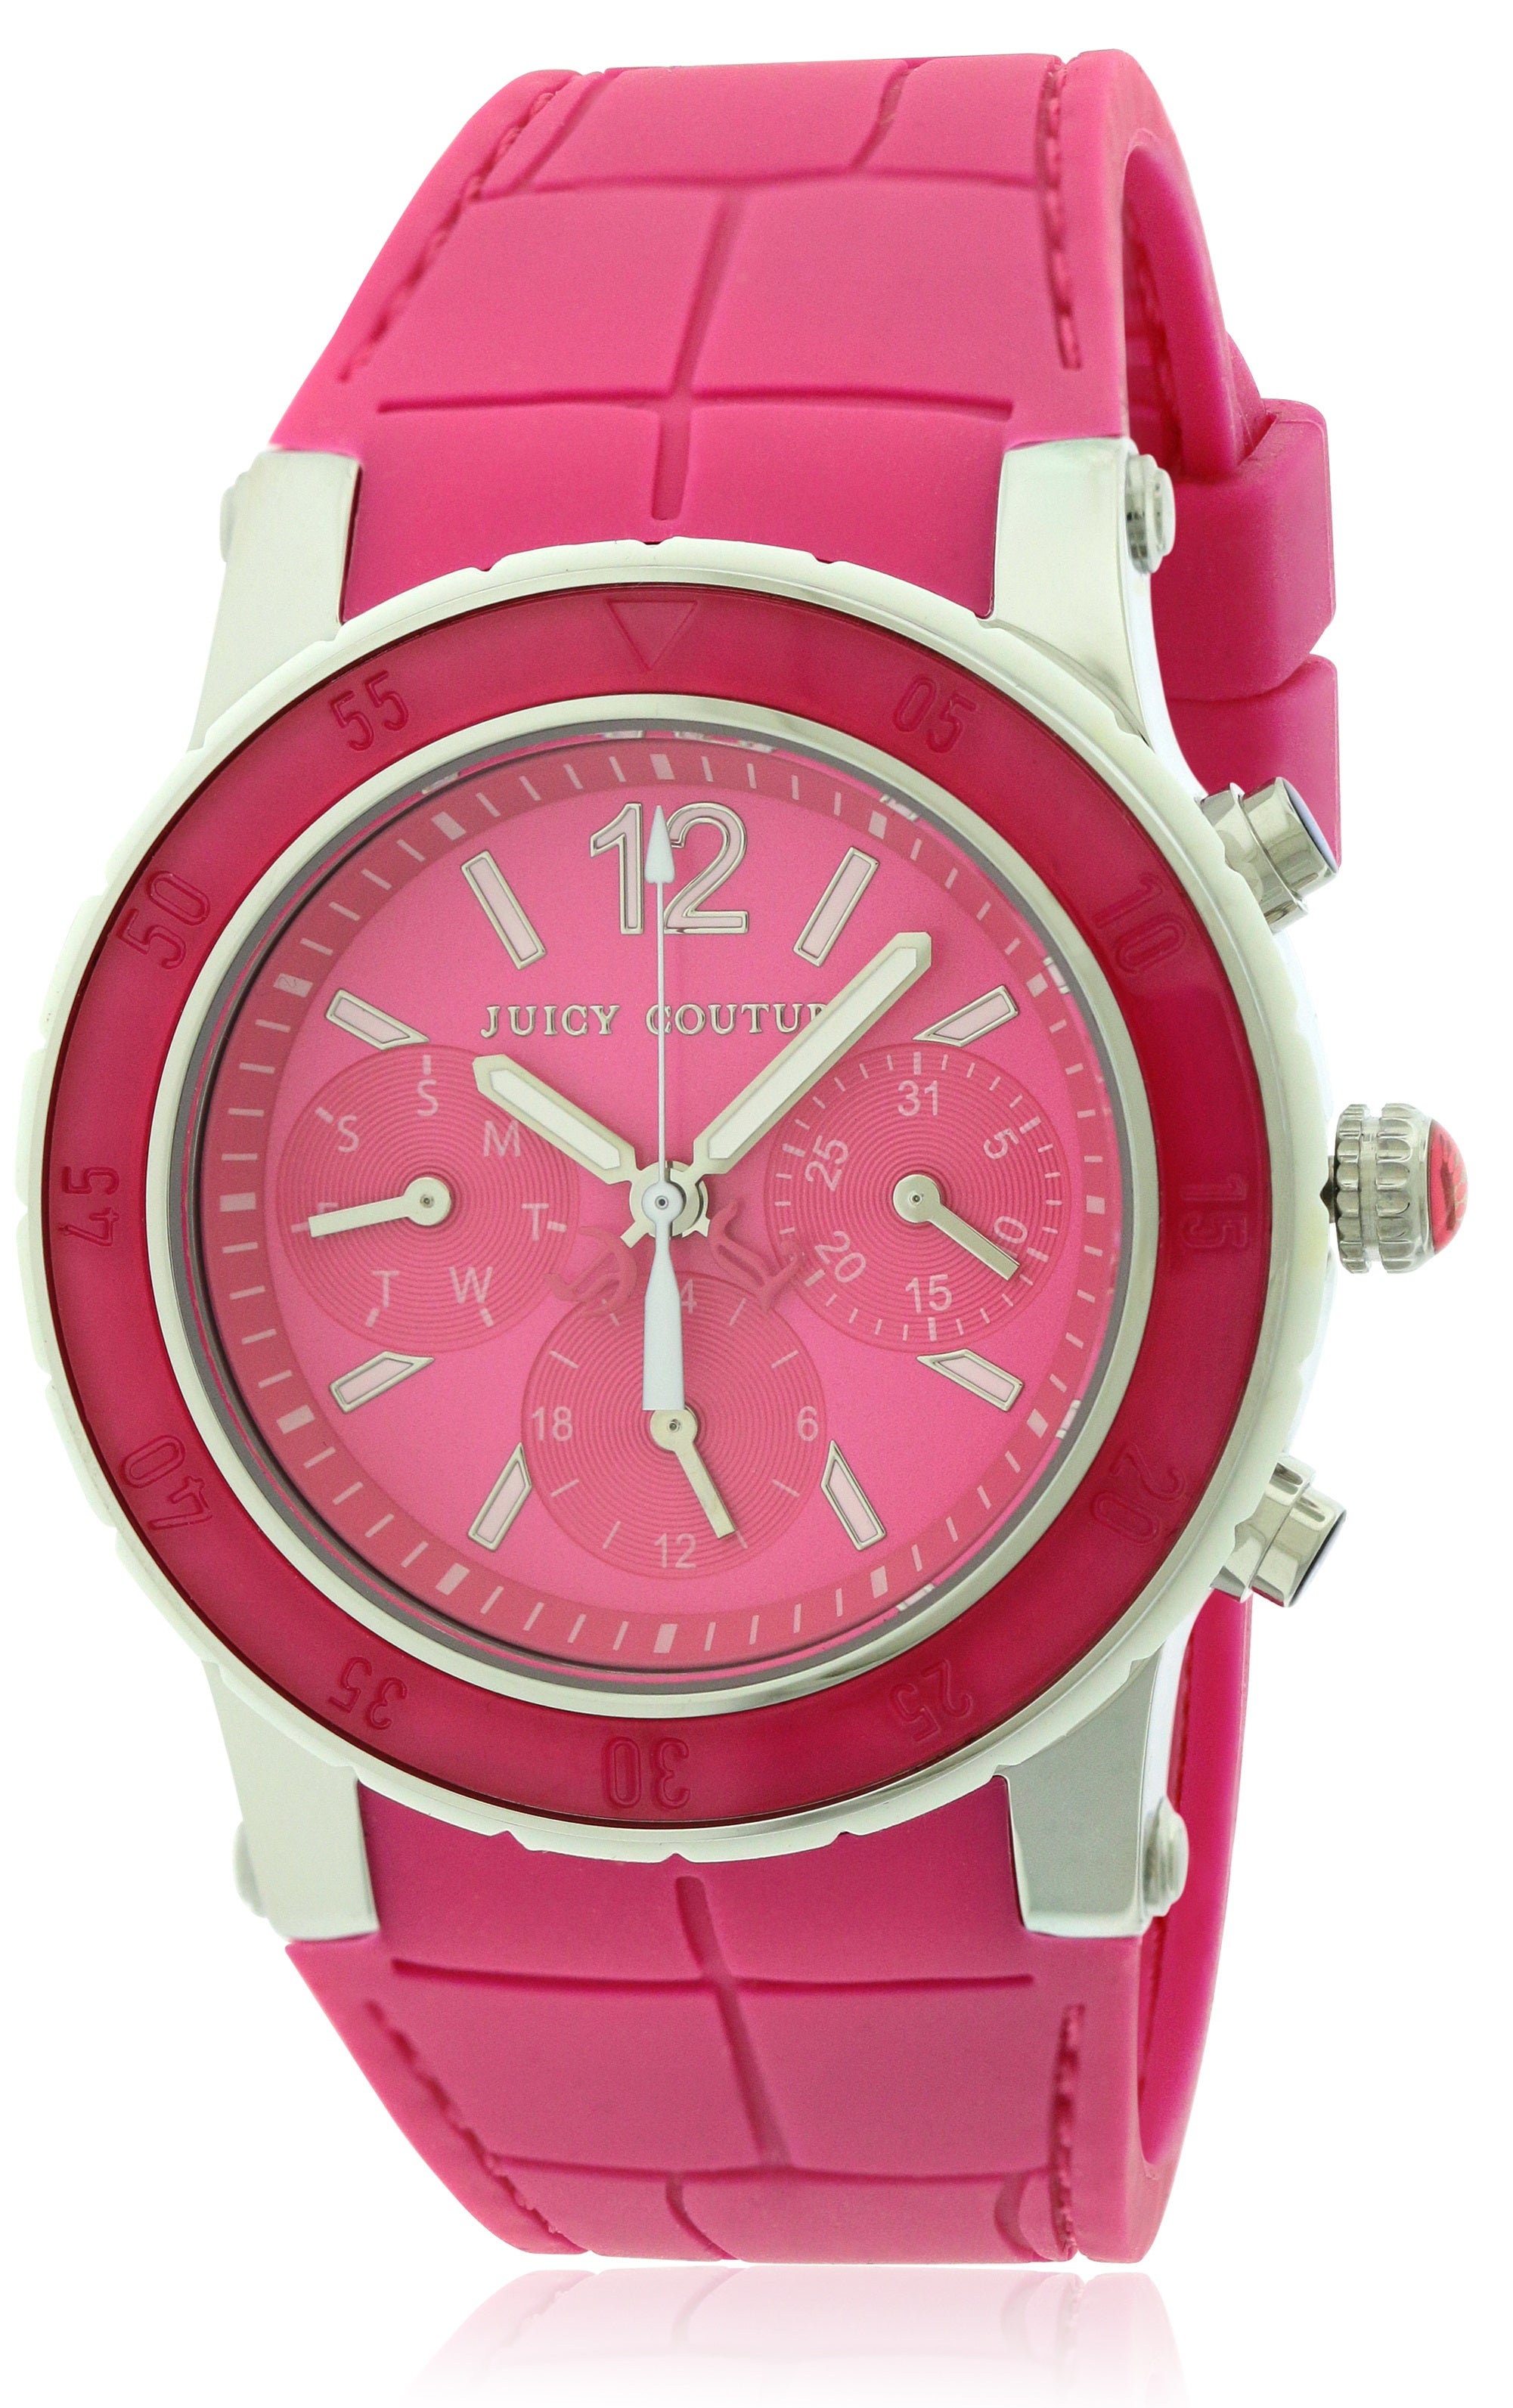 Juicy Couture HRH Pink Dragon Fruit Chronograph Ladies Watch